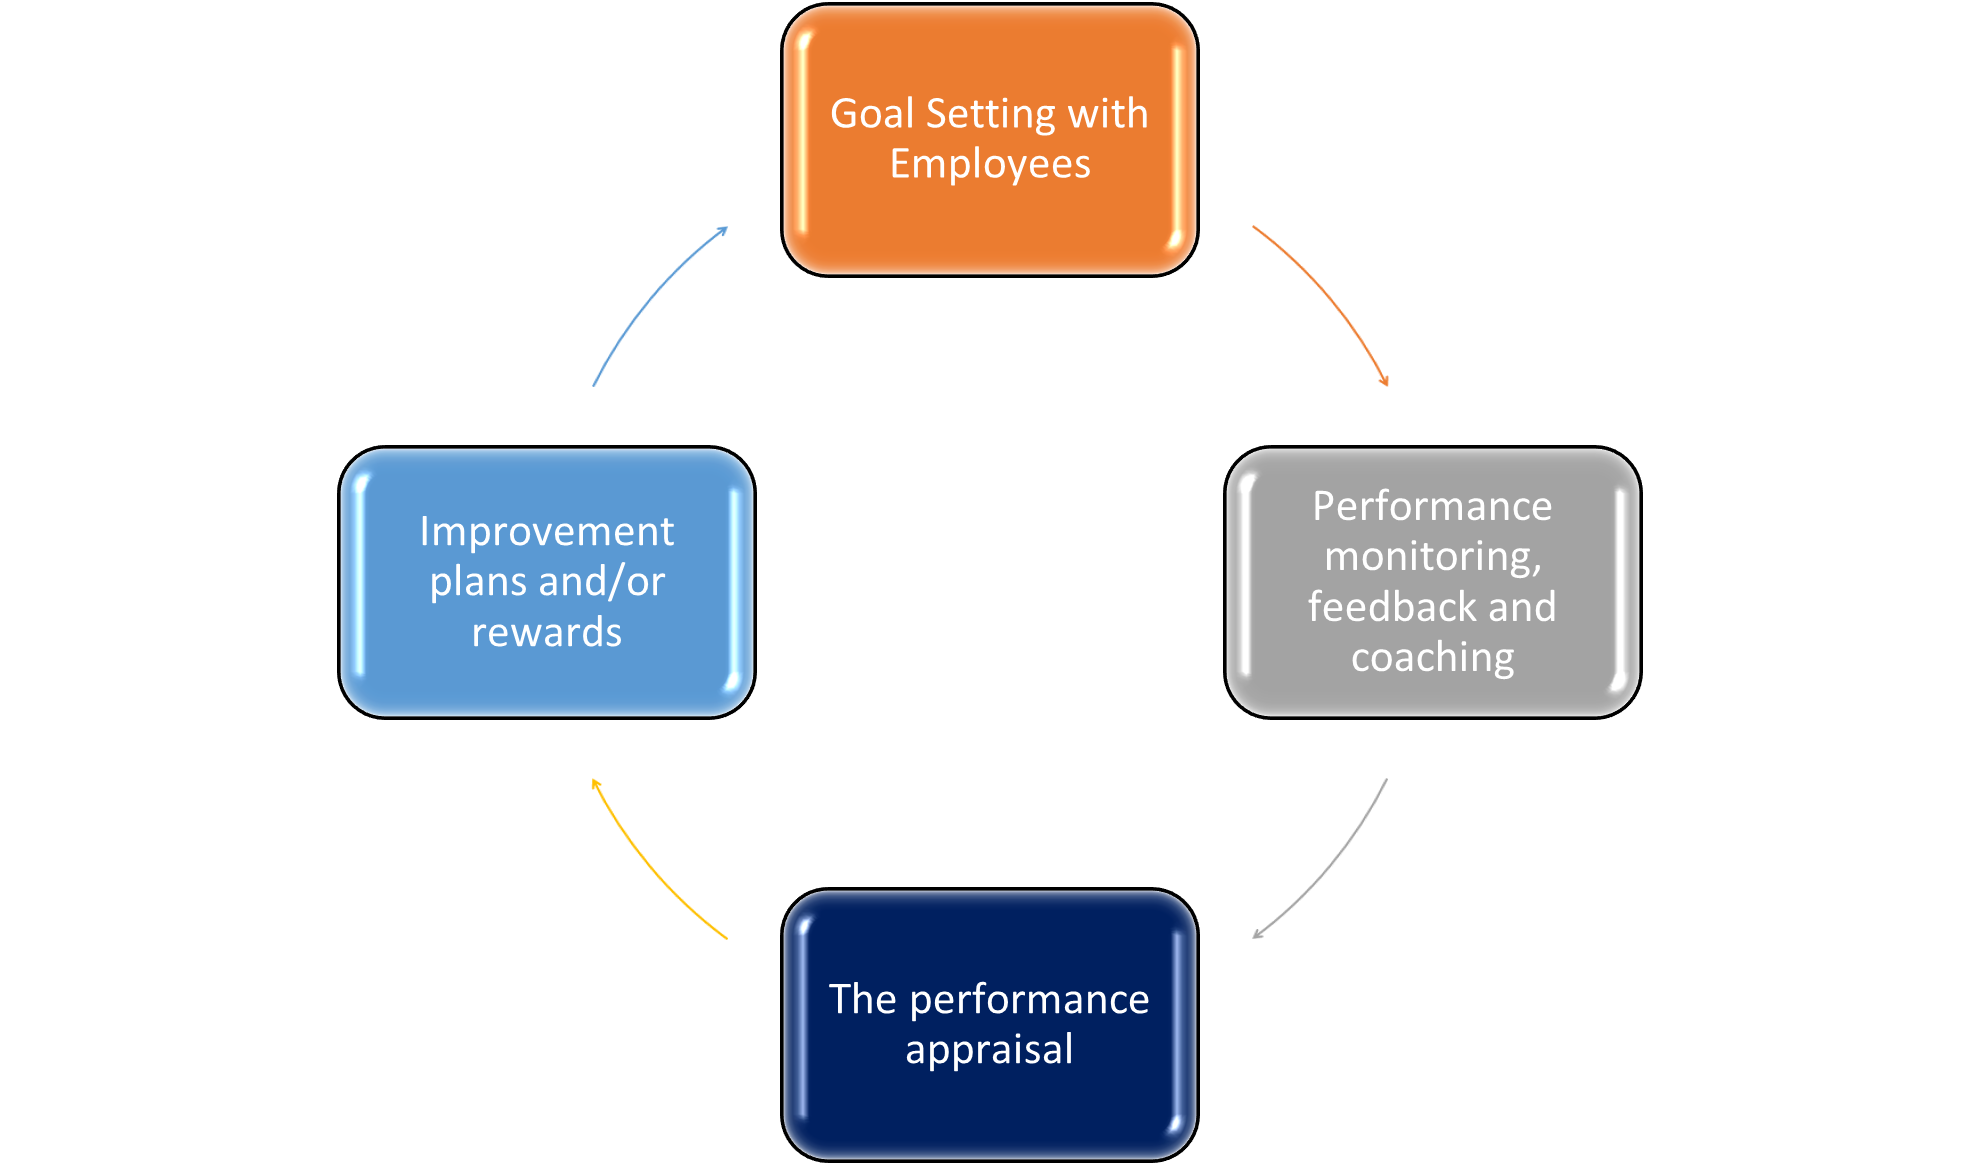 performance review system as described in text above - The first step of the process is goal setting with the employee., second performance monitoring, feedback and coaching, third - performance appraisal, fourth - improvement plans and/or rewards.